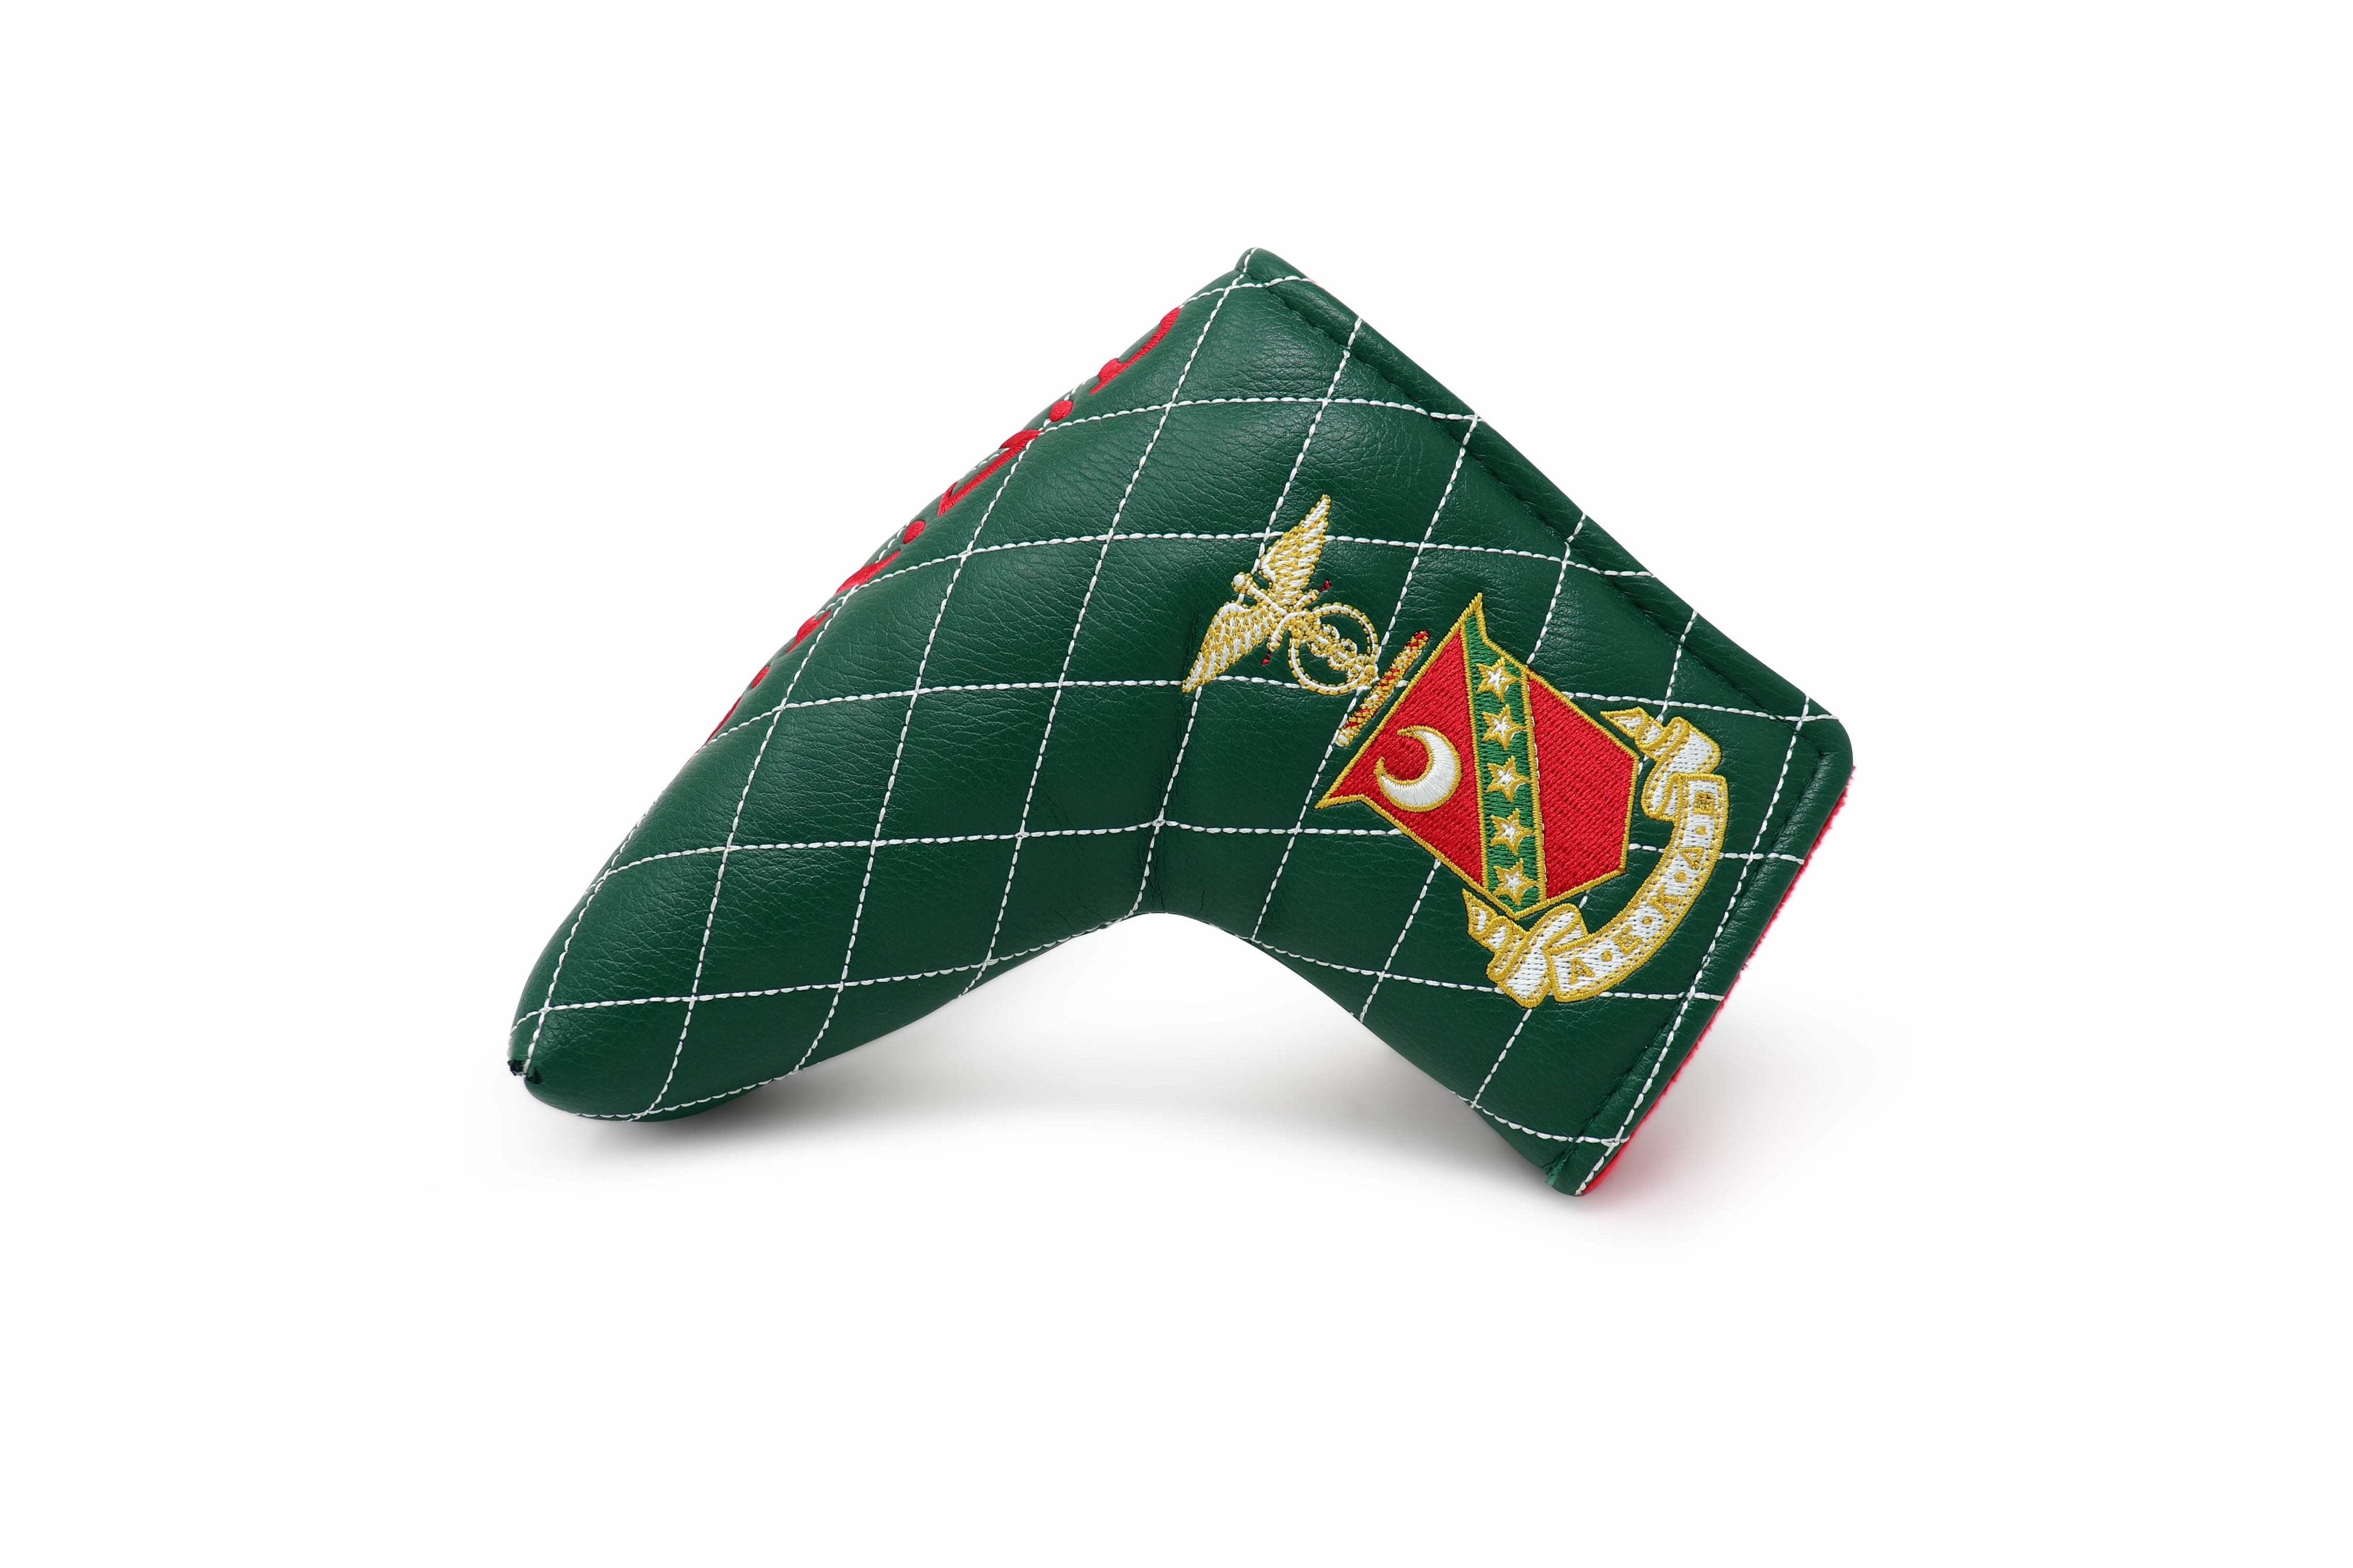 Kappa Sigma Blade Putter Headcover Fraternity